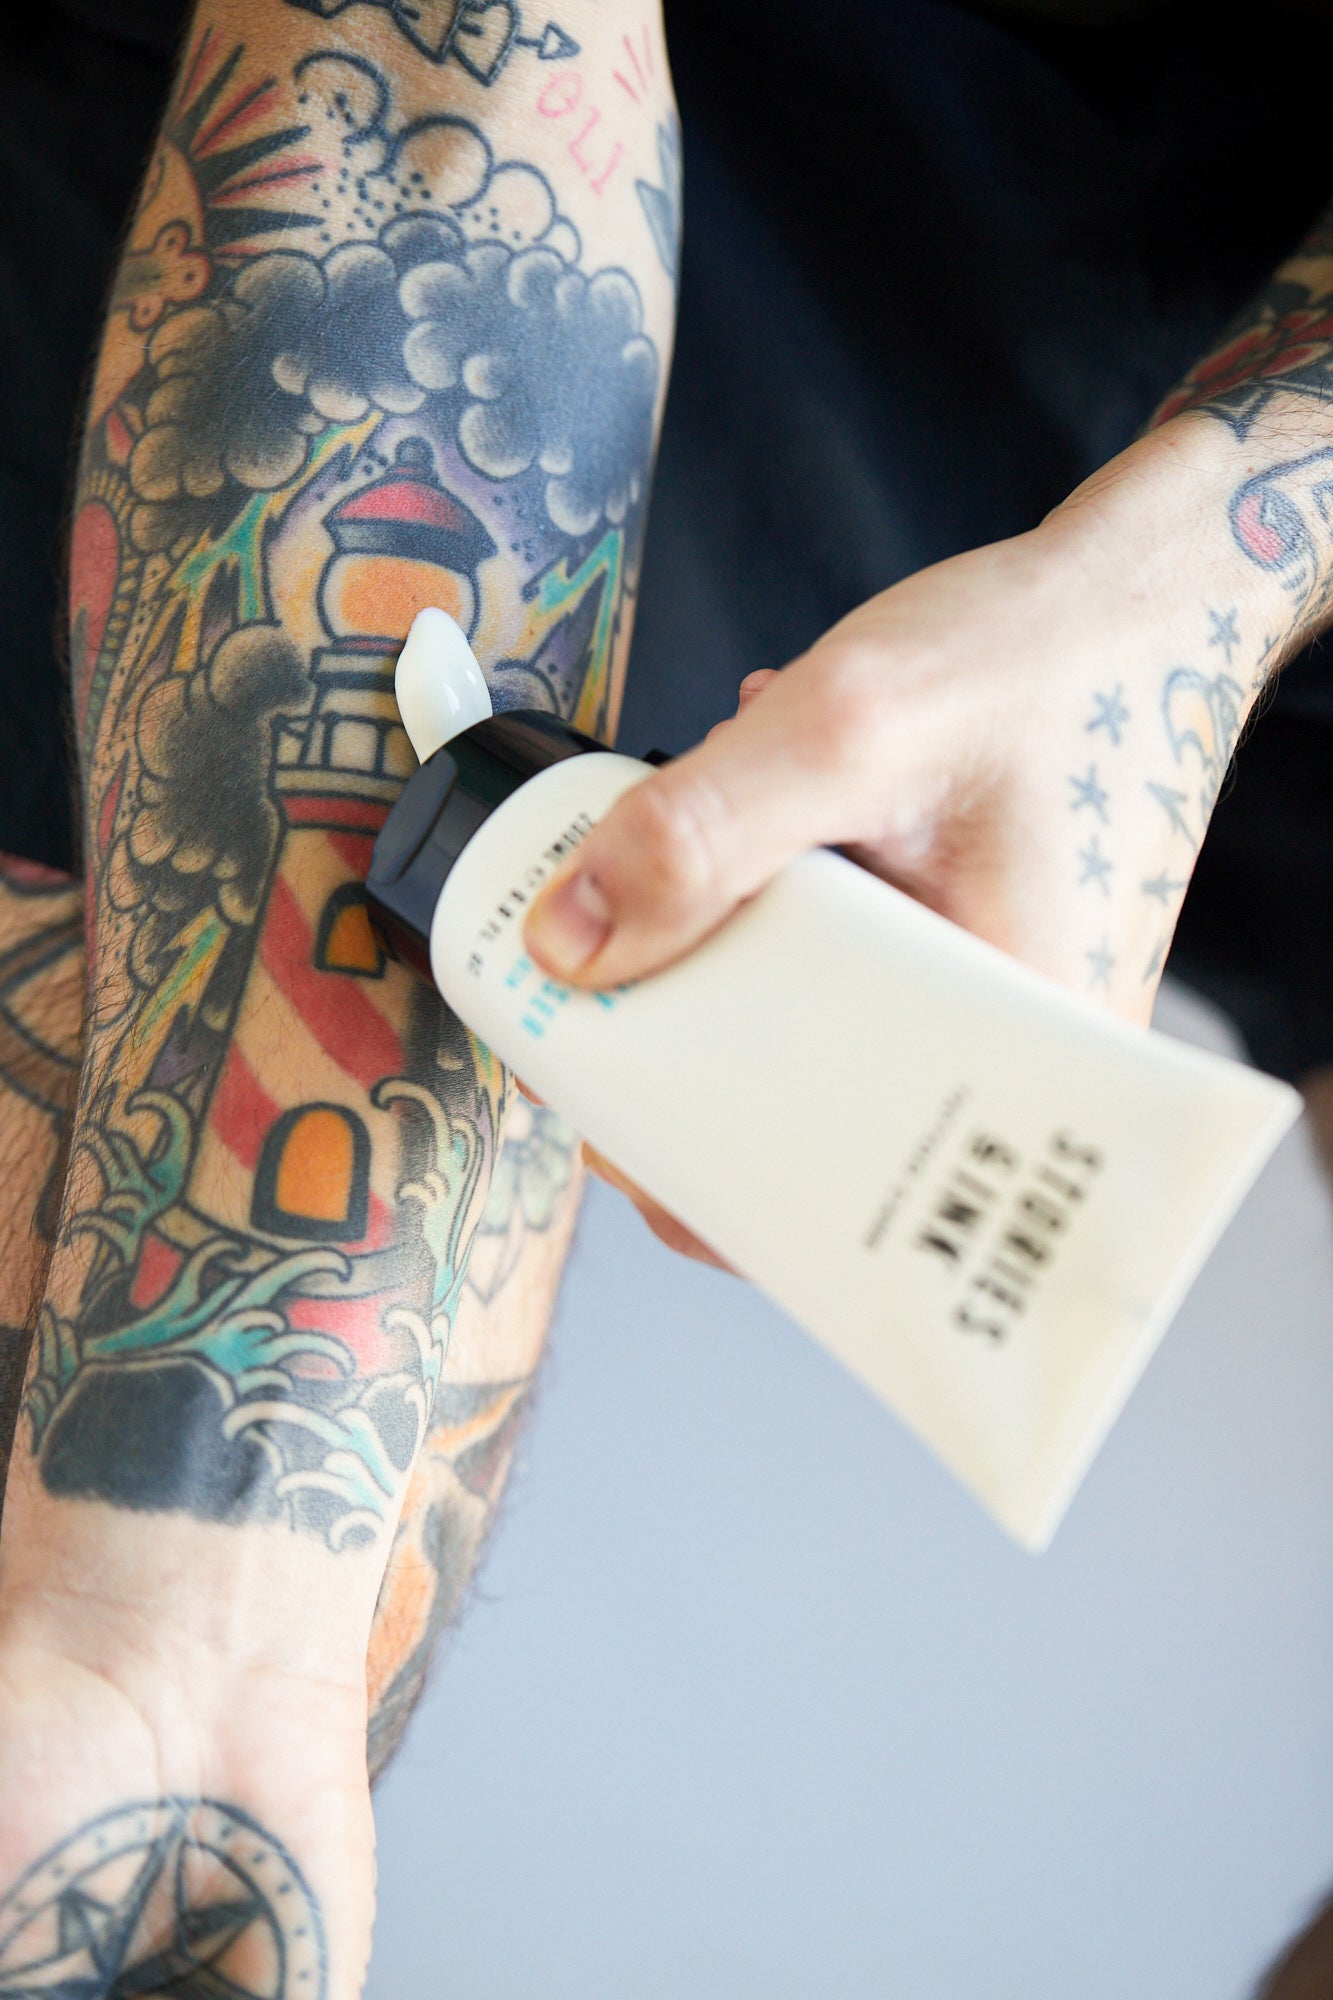 Tattoos may cause years of infection itching and swelling